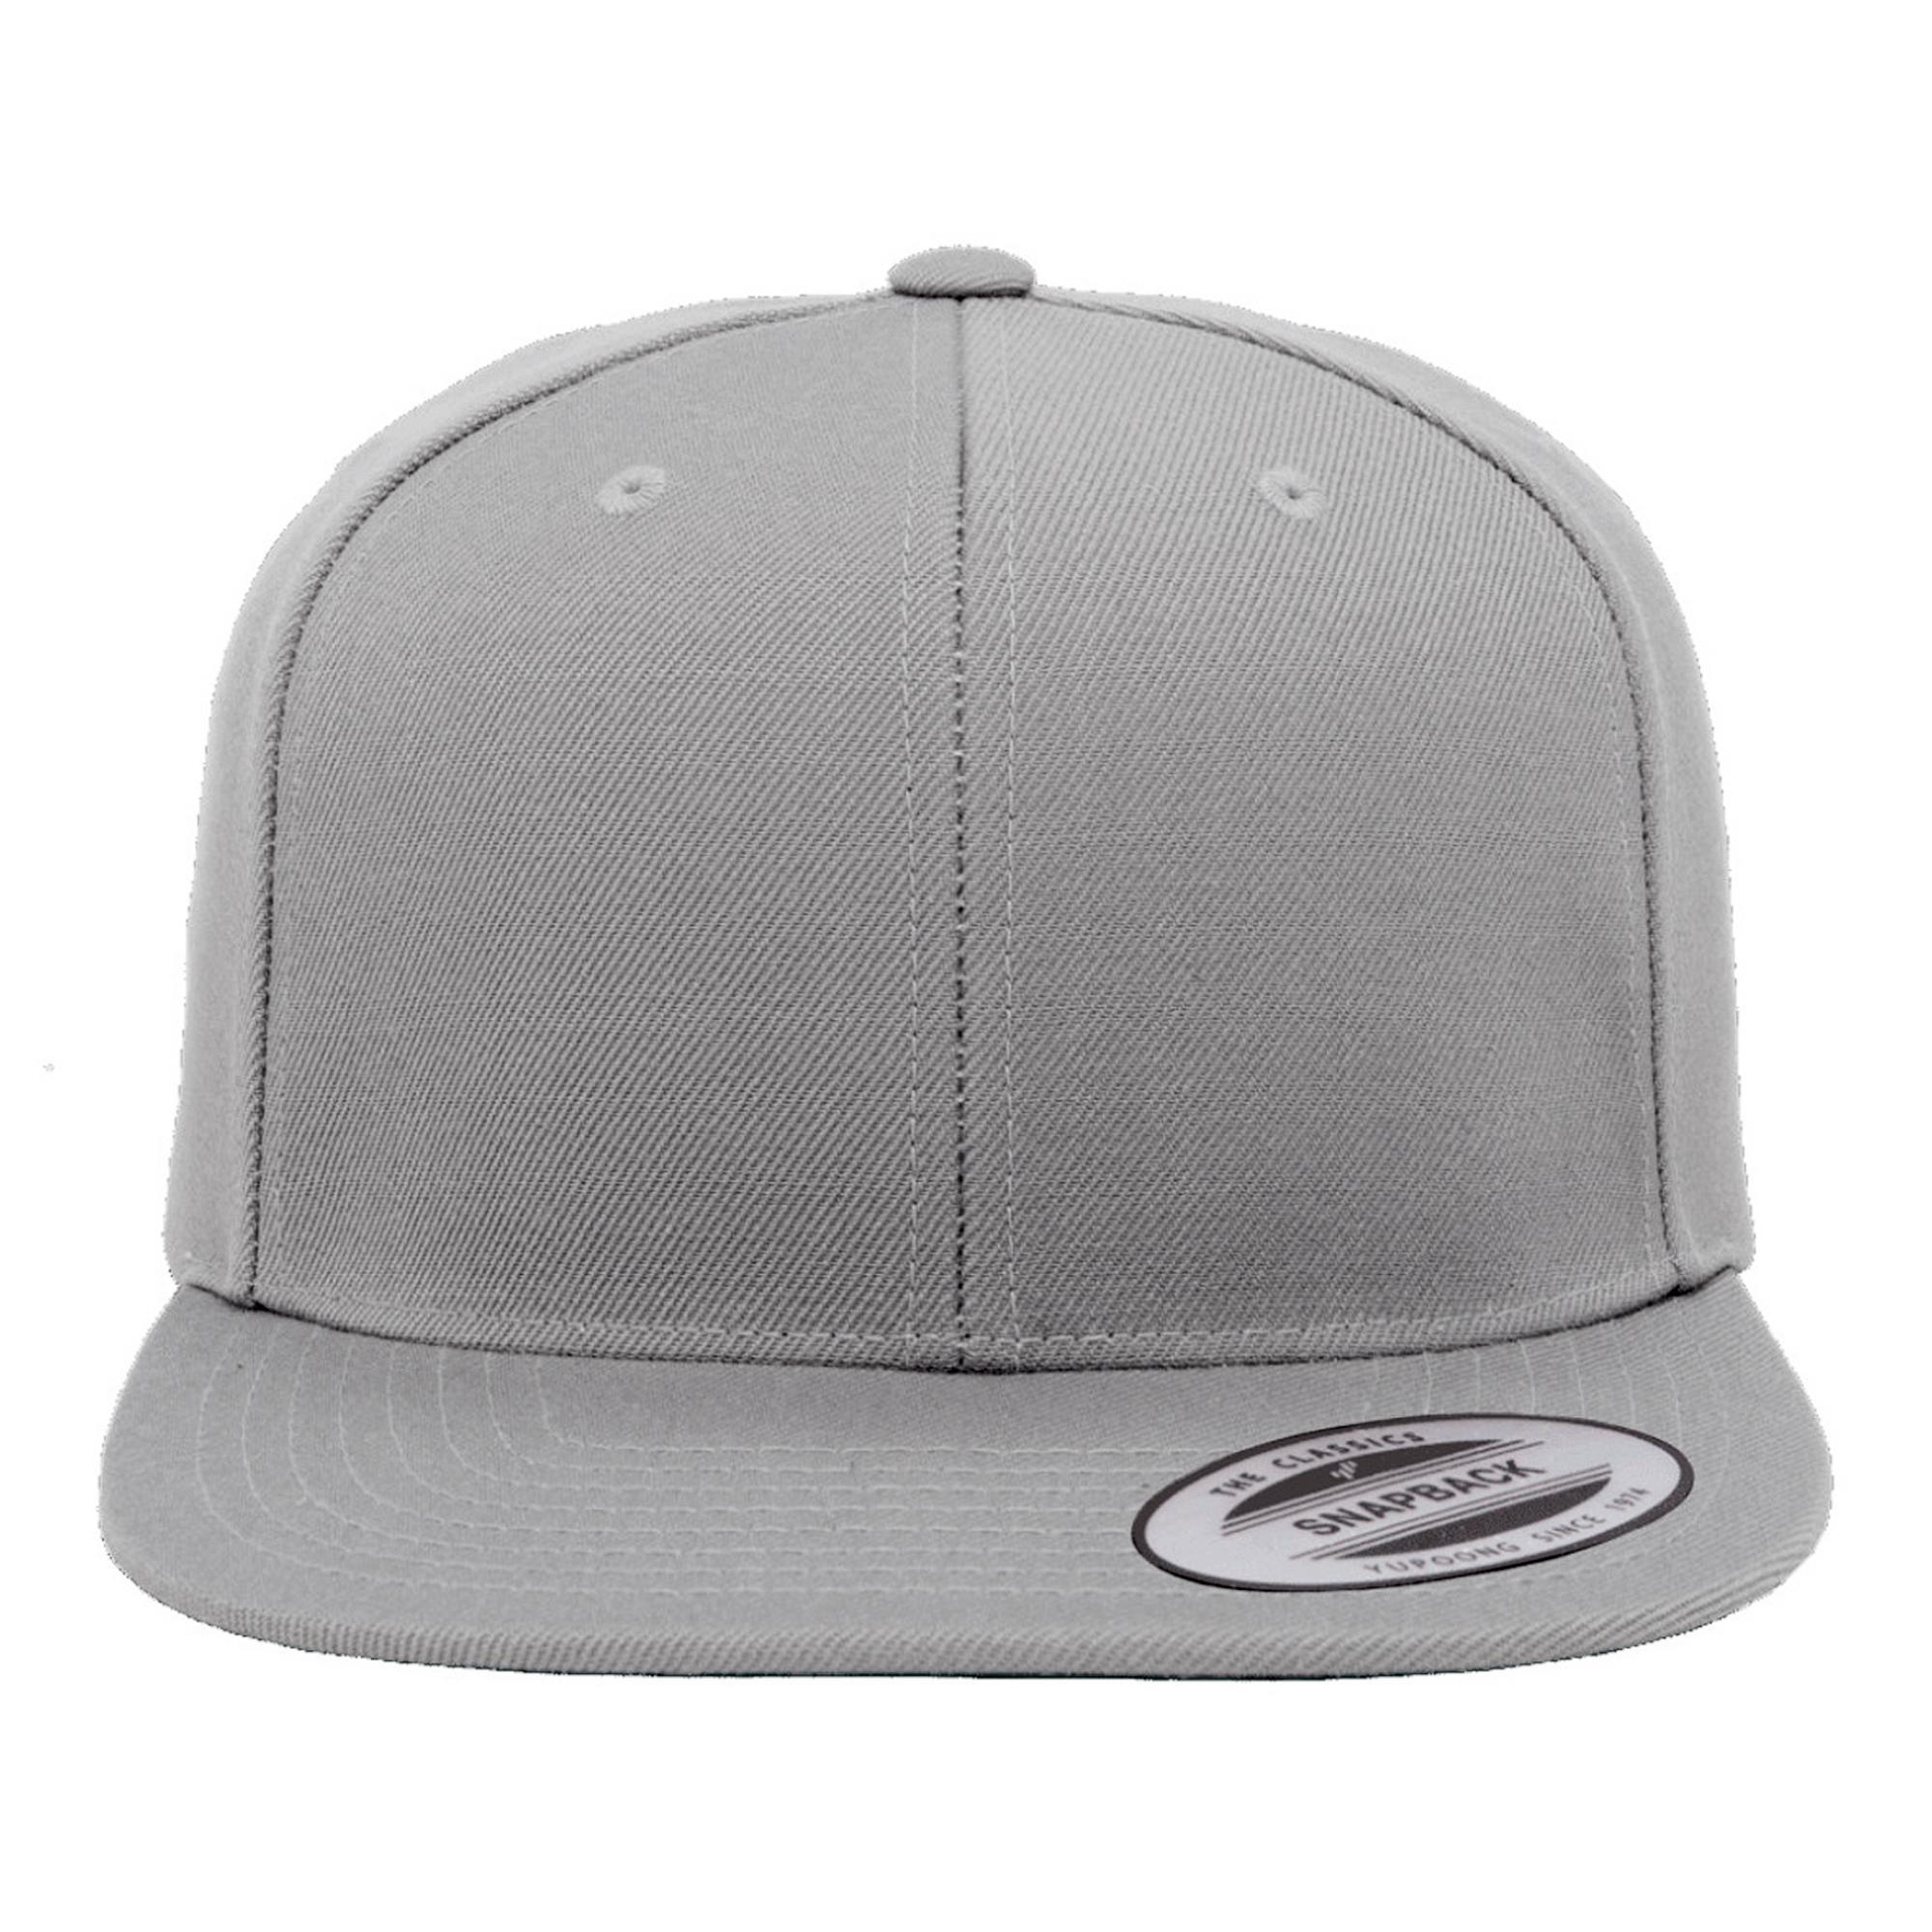 Yupoong Mens The Classic Premium Snapback Cap (Heather Grey) (One Size)